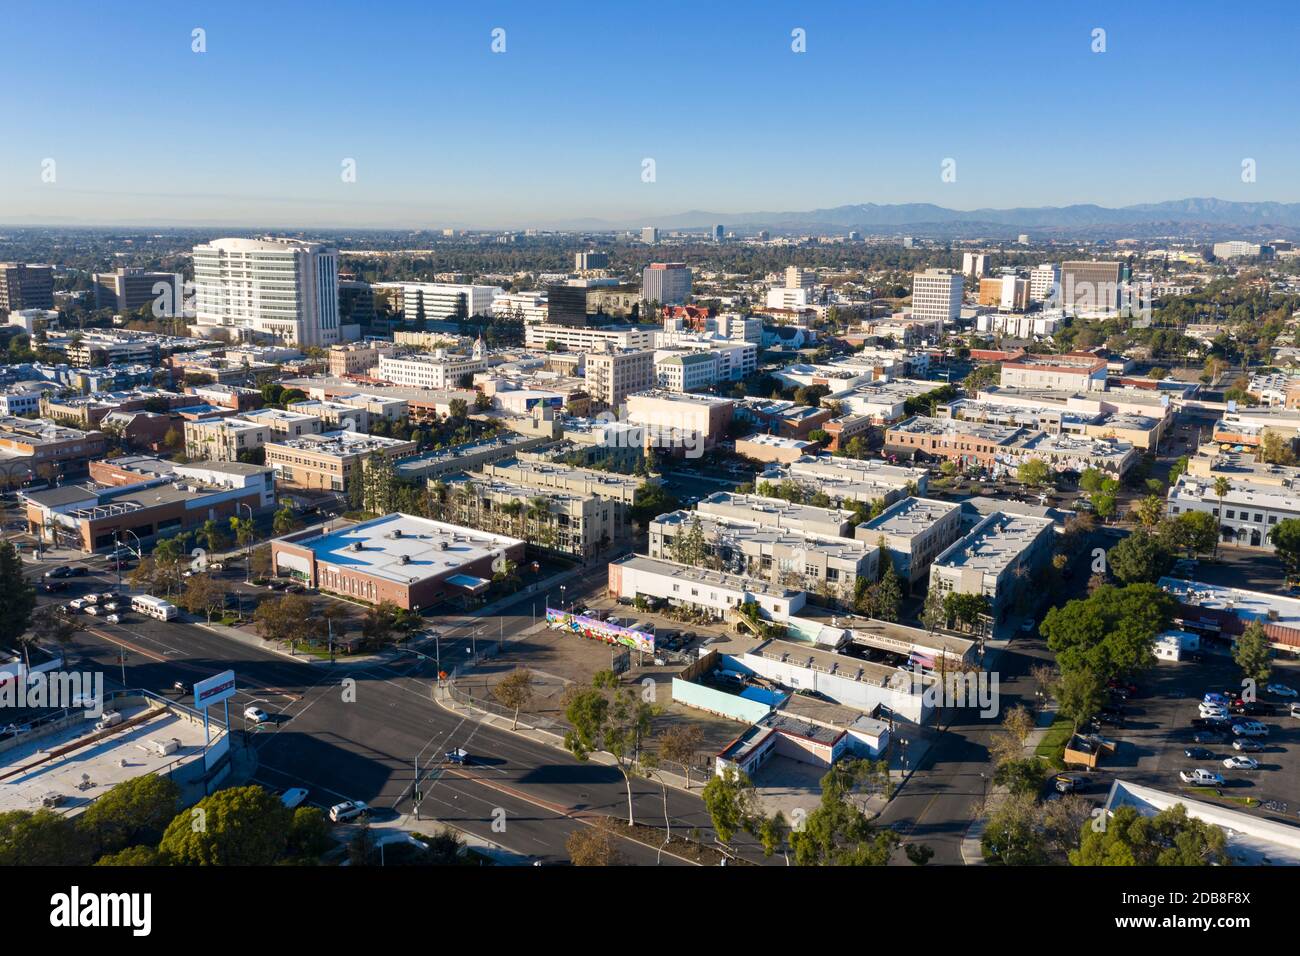 Aerial view of downtown Santa Ana California including the federal courthouse building Stock Photo